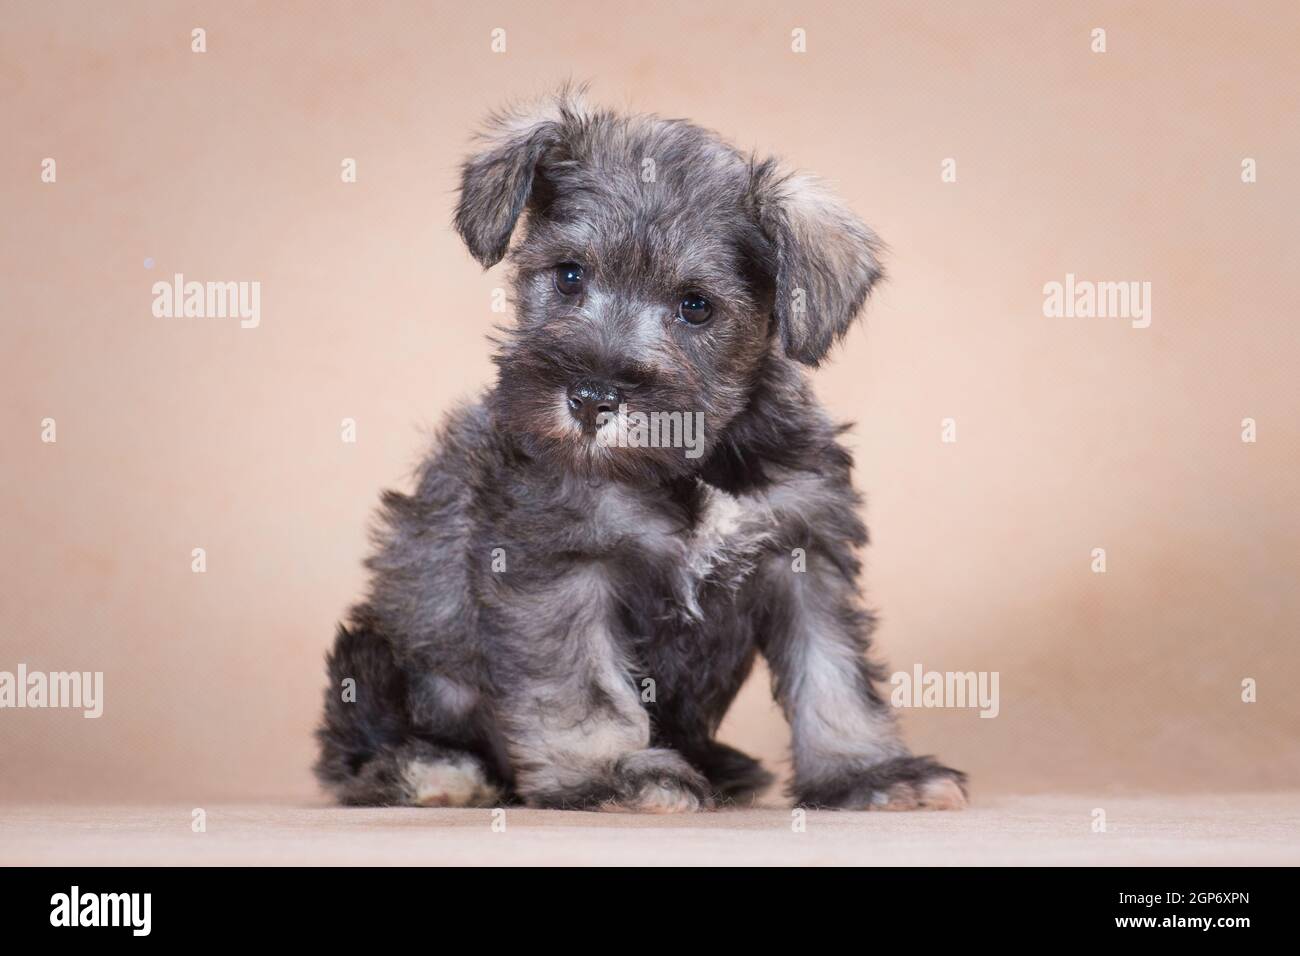 Small, color pepper and salt, a puppy of the breed miniature schnauzer sits on a beige background, indoors, in the studio Stock Photo